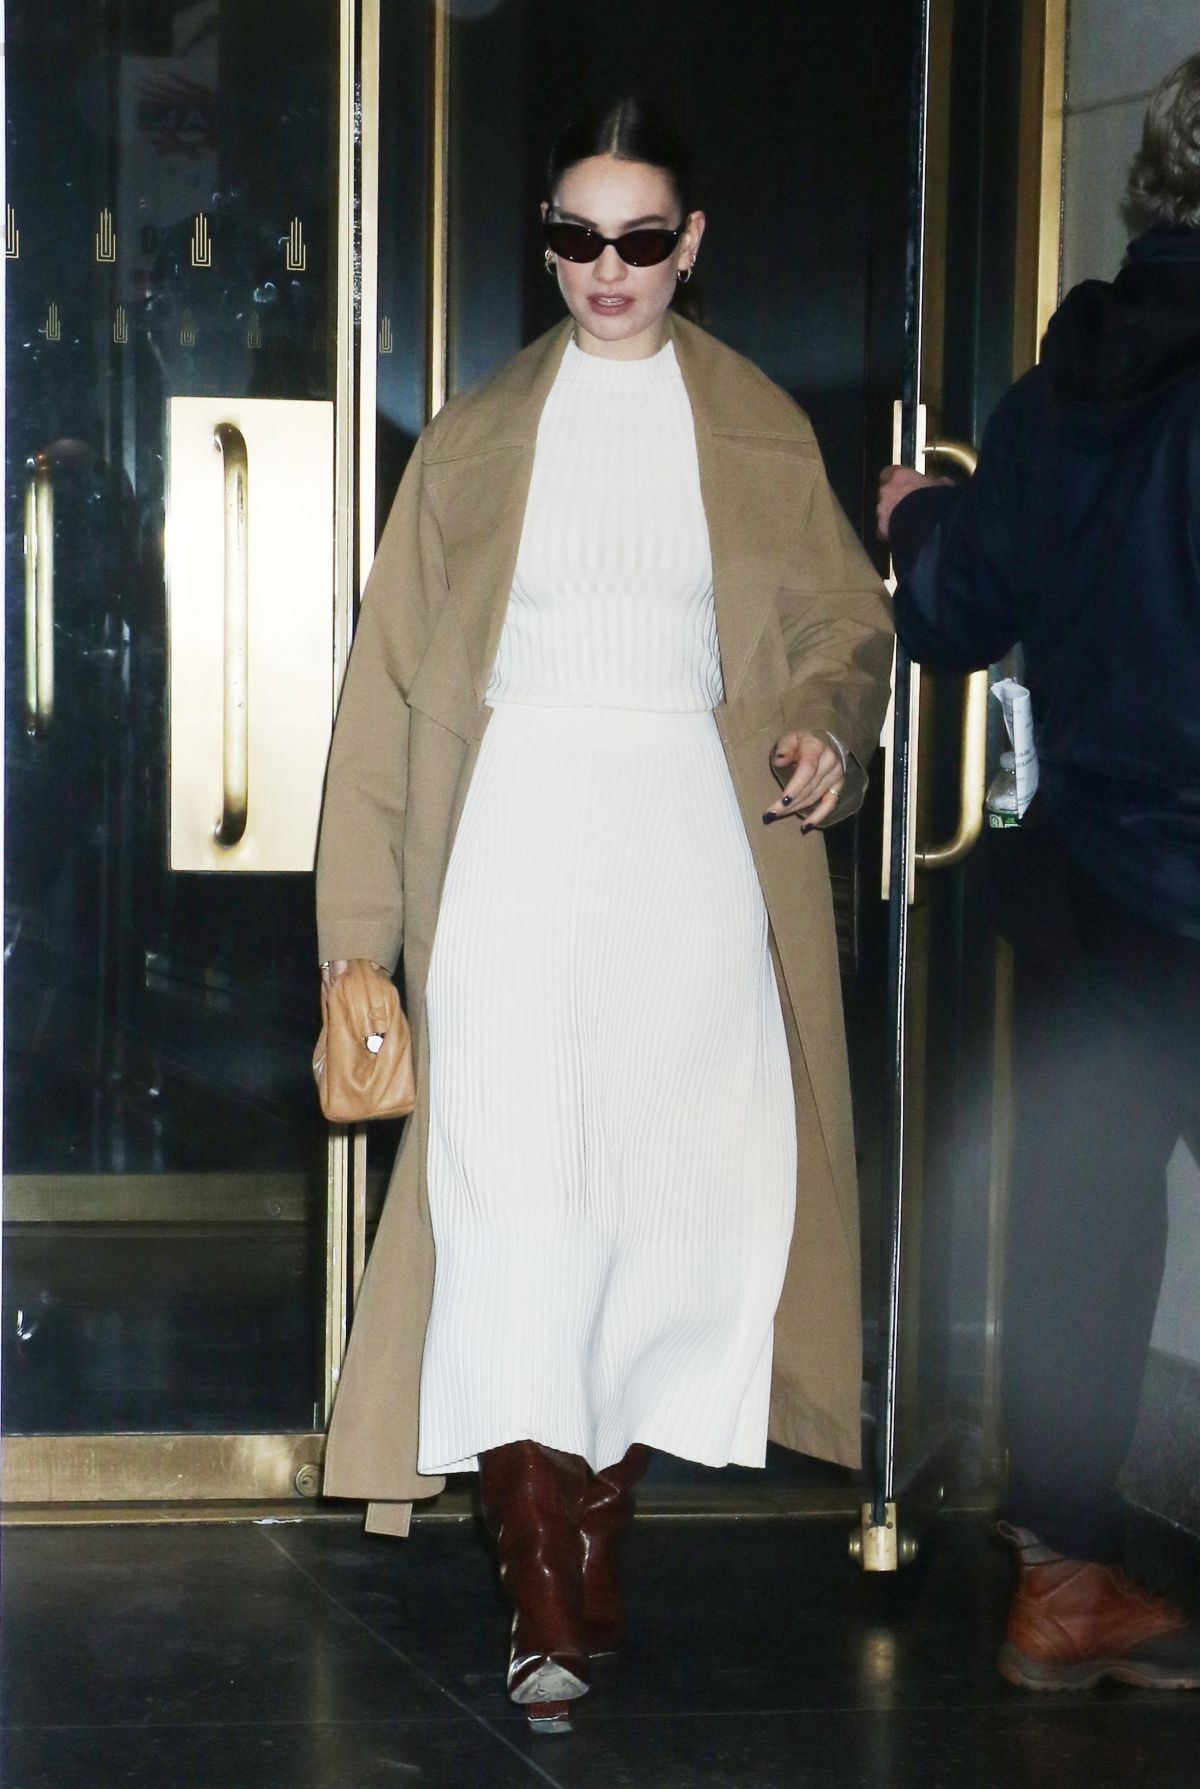 Lily James in White Dress and Brown Boots in Today Show NYC 1